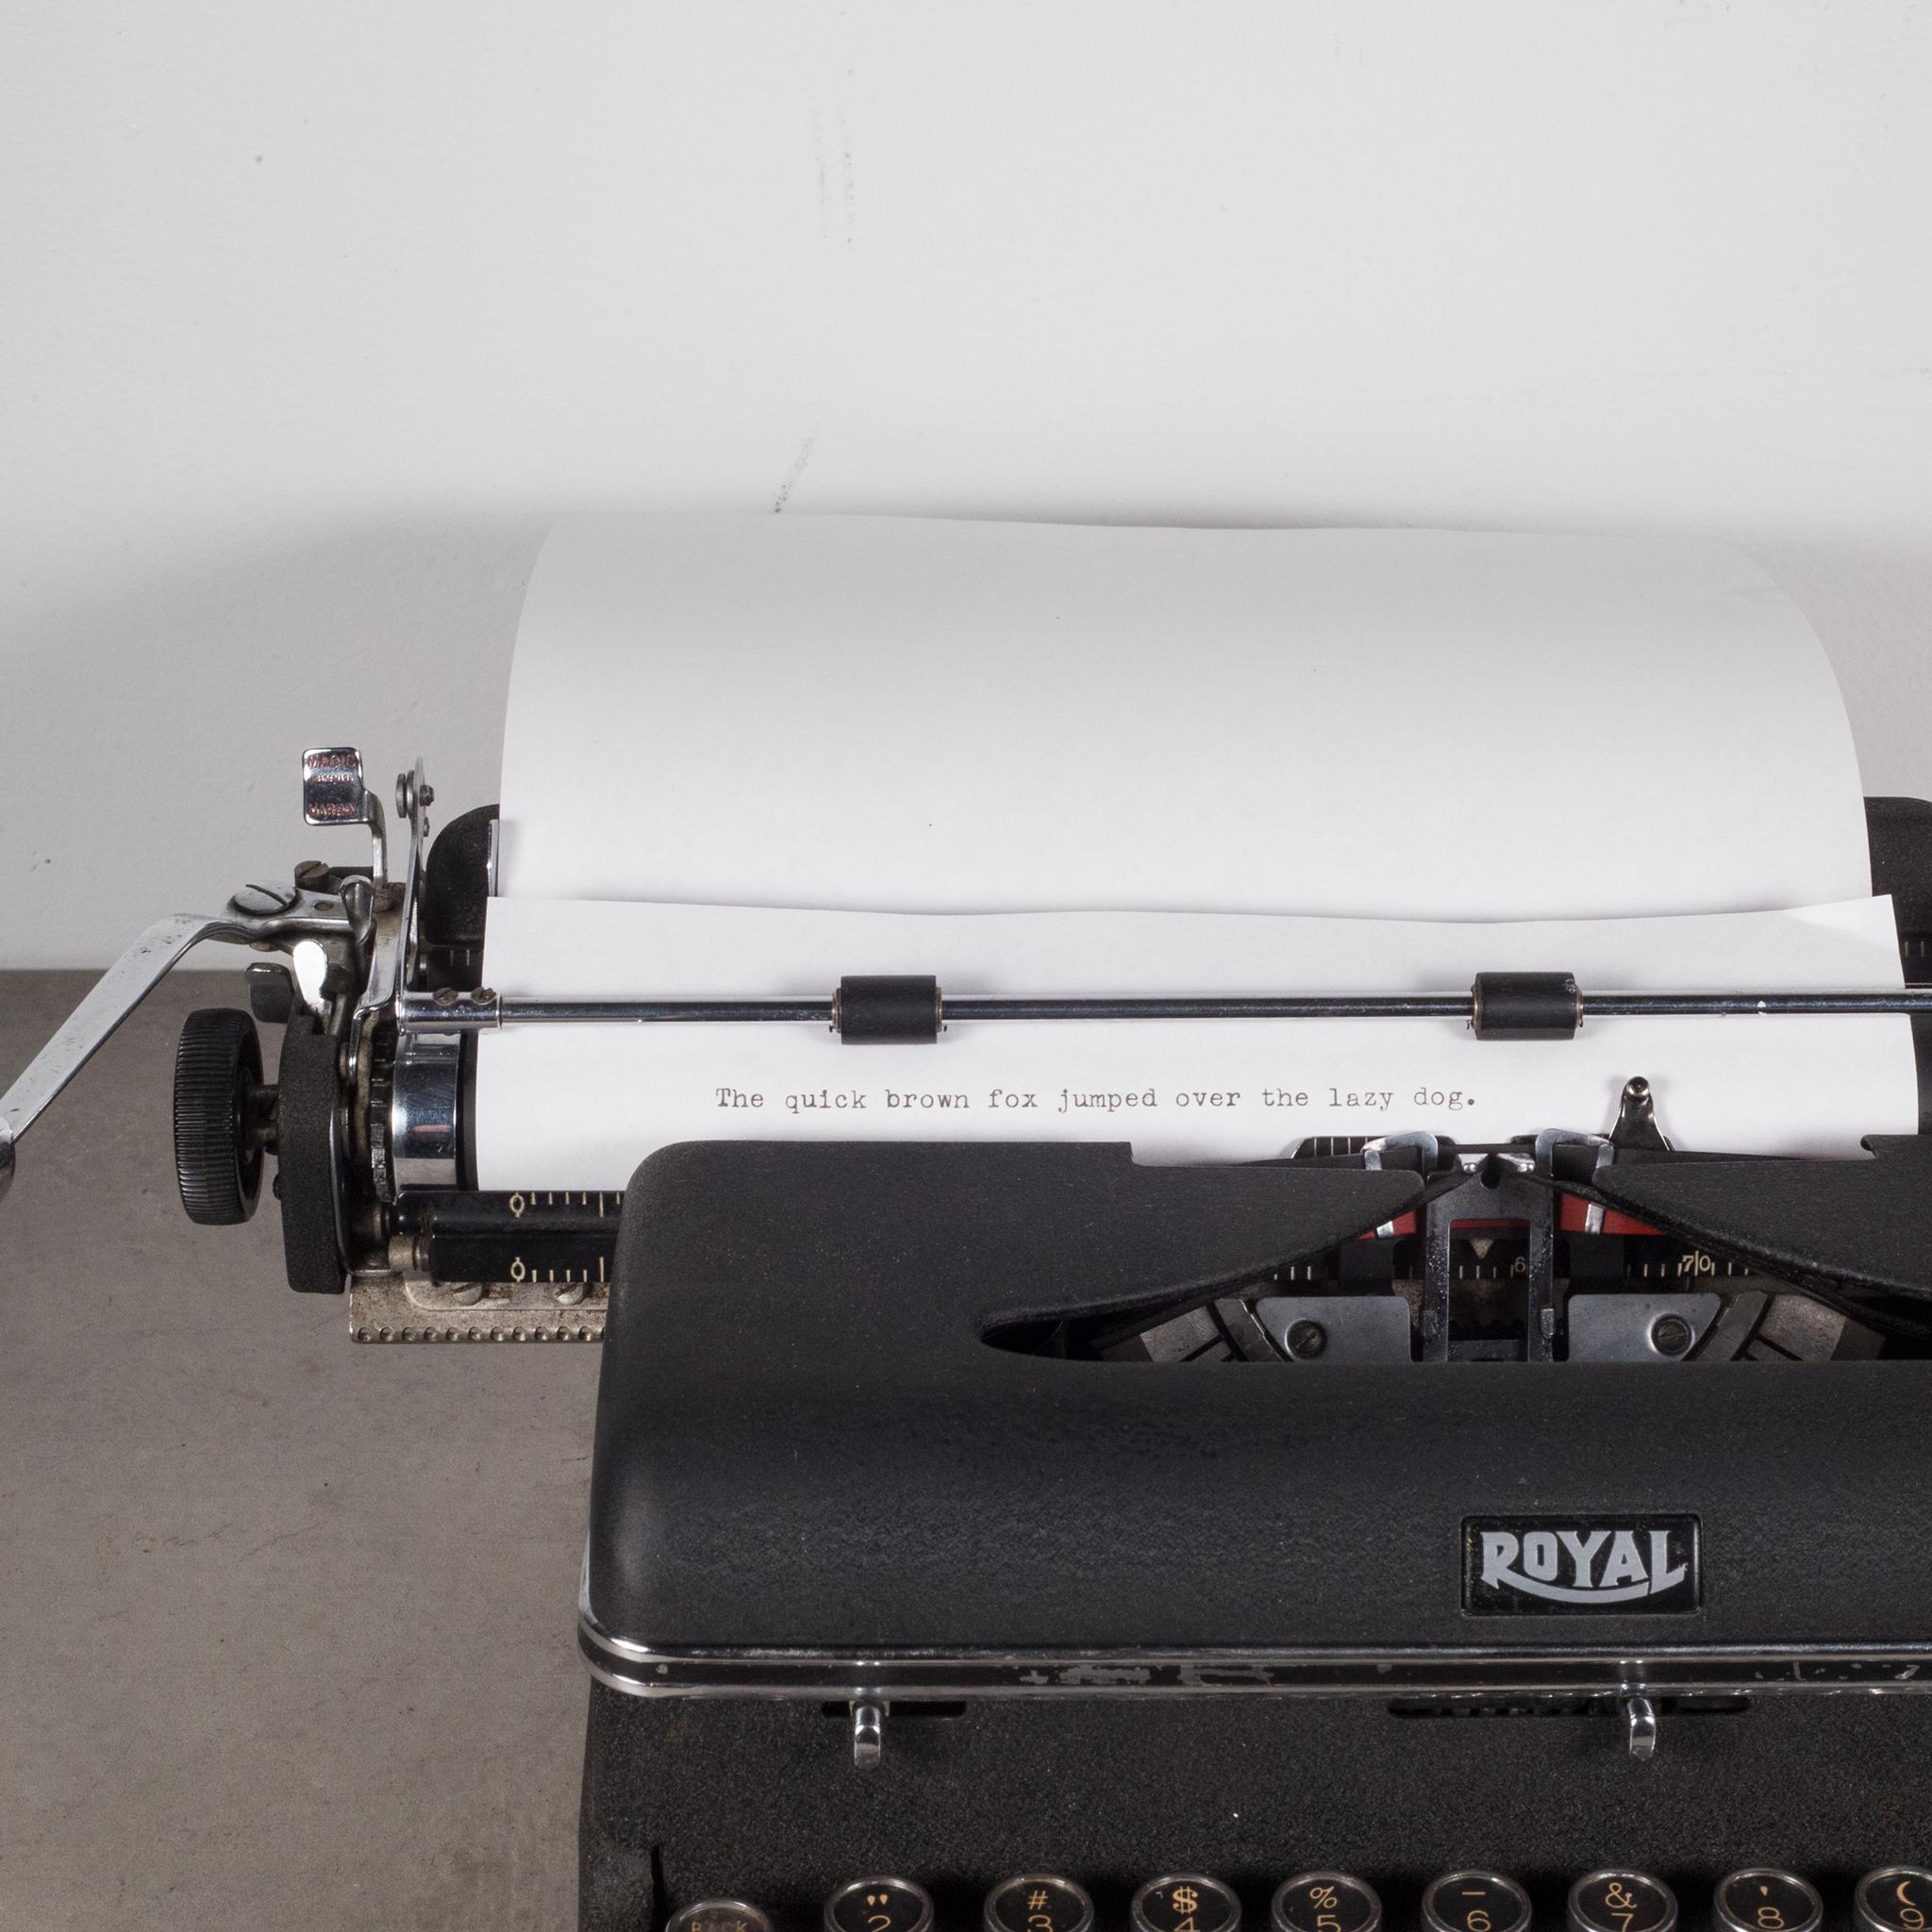 Metal Fully Refurbished Royal Quiet DeLuxe Typewriter with Black Crinkle Finish c.1939